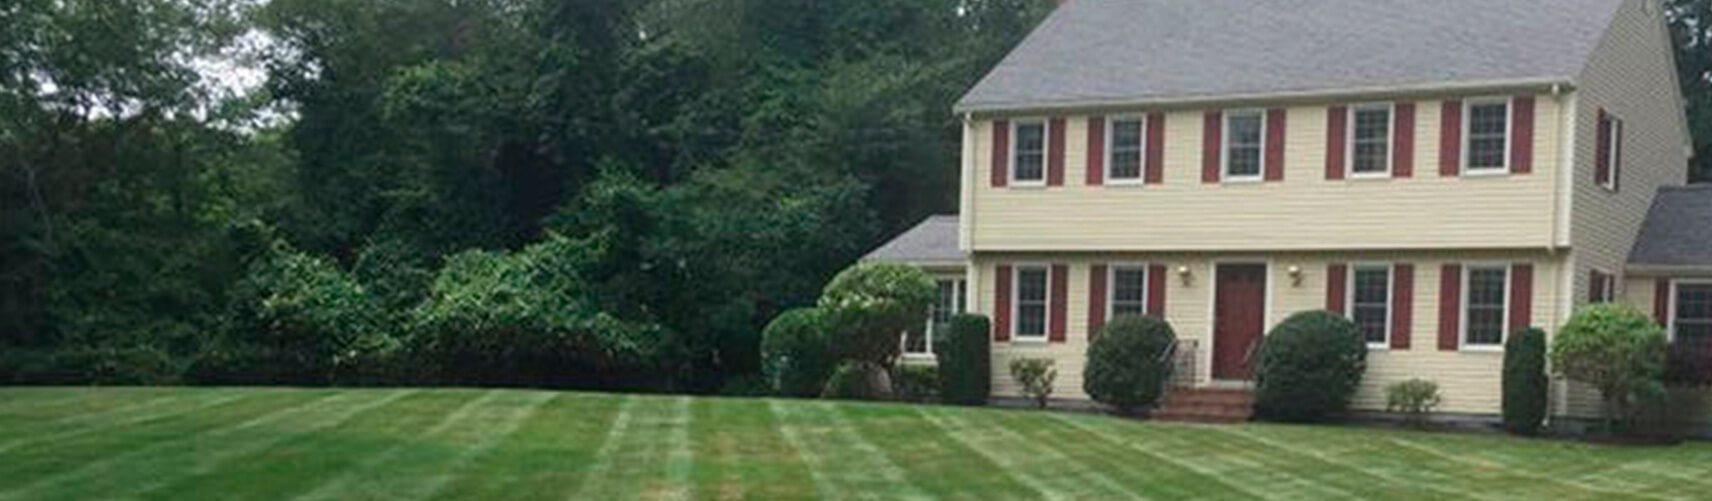 Melrose Landscaping Company, Landscaper and Landscaping Services